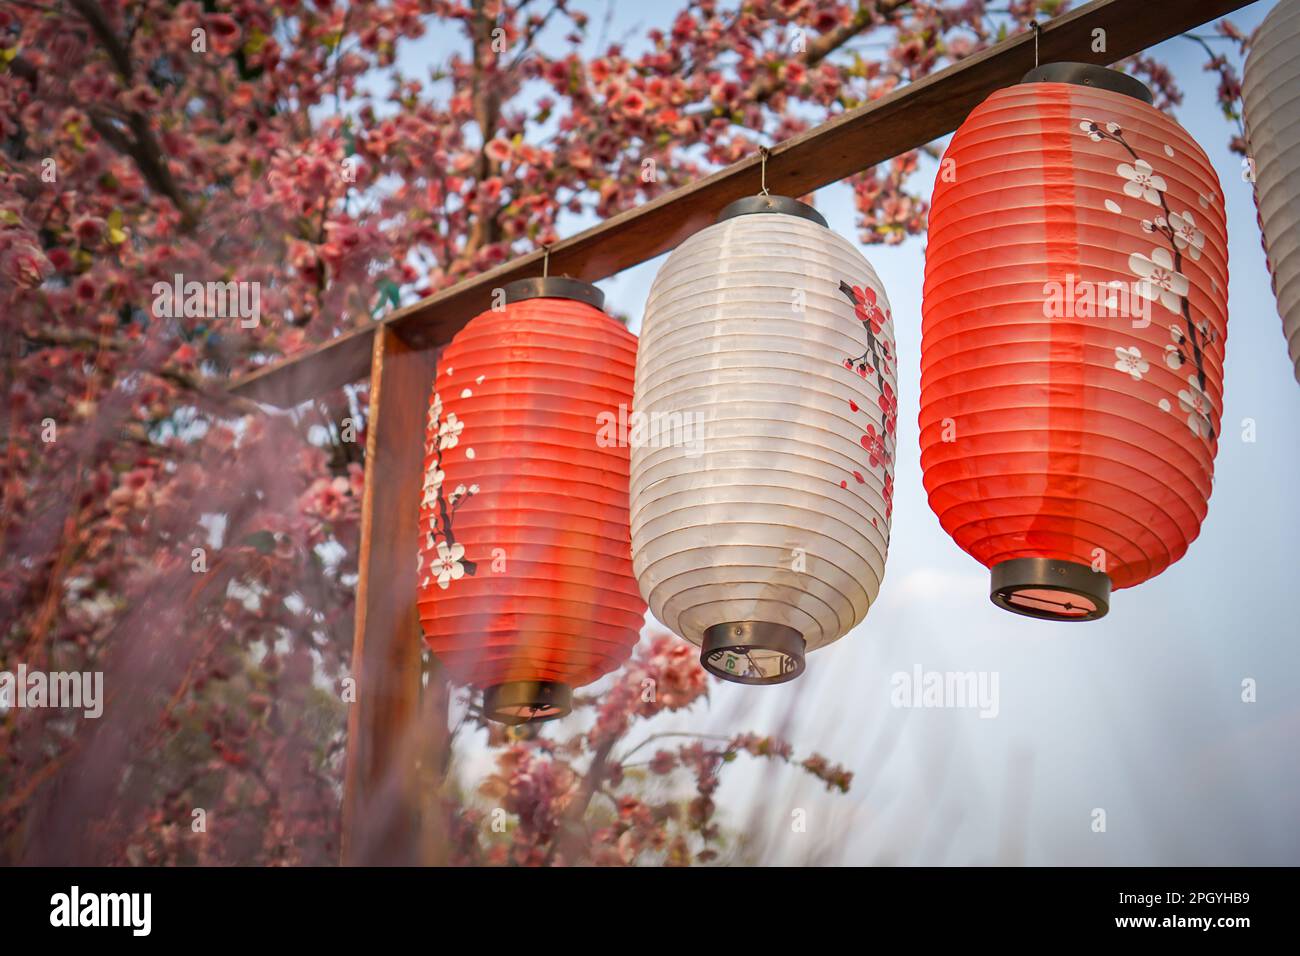 Japanese-style hanging lanterns to decorate the garden. Stock Photo